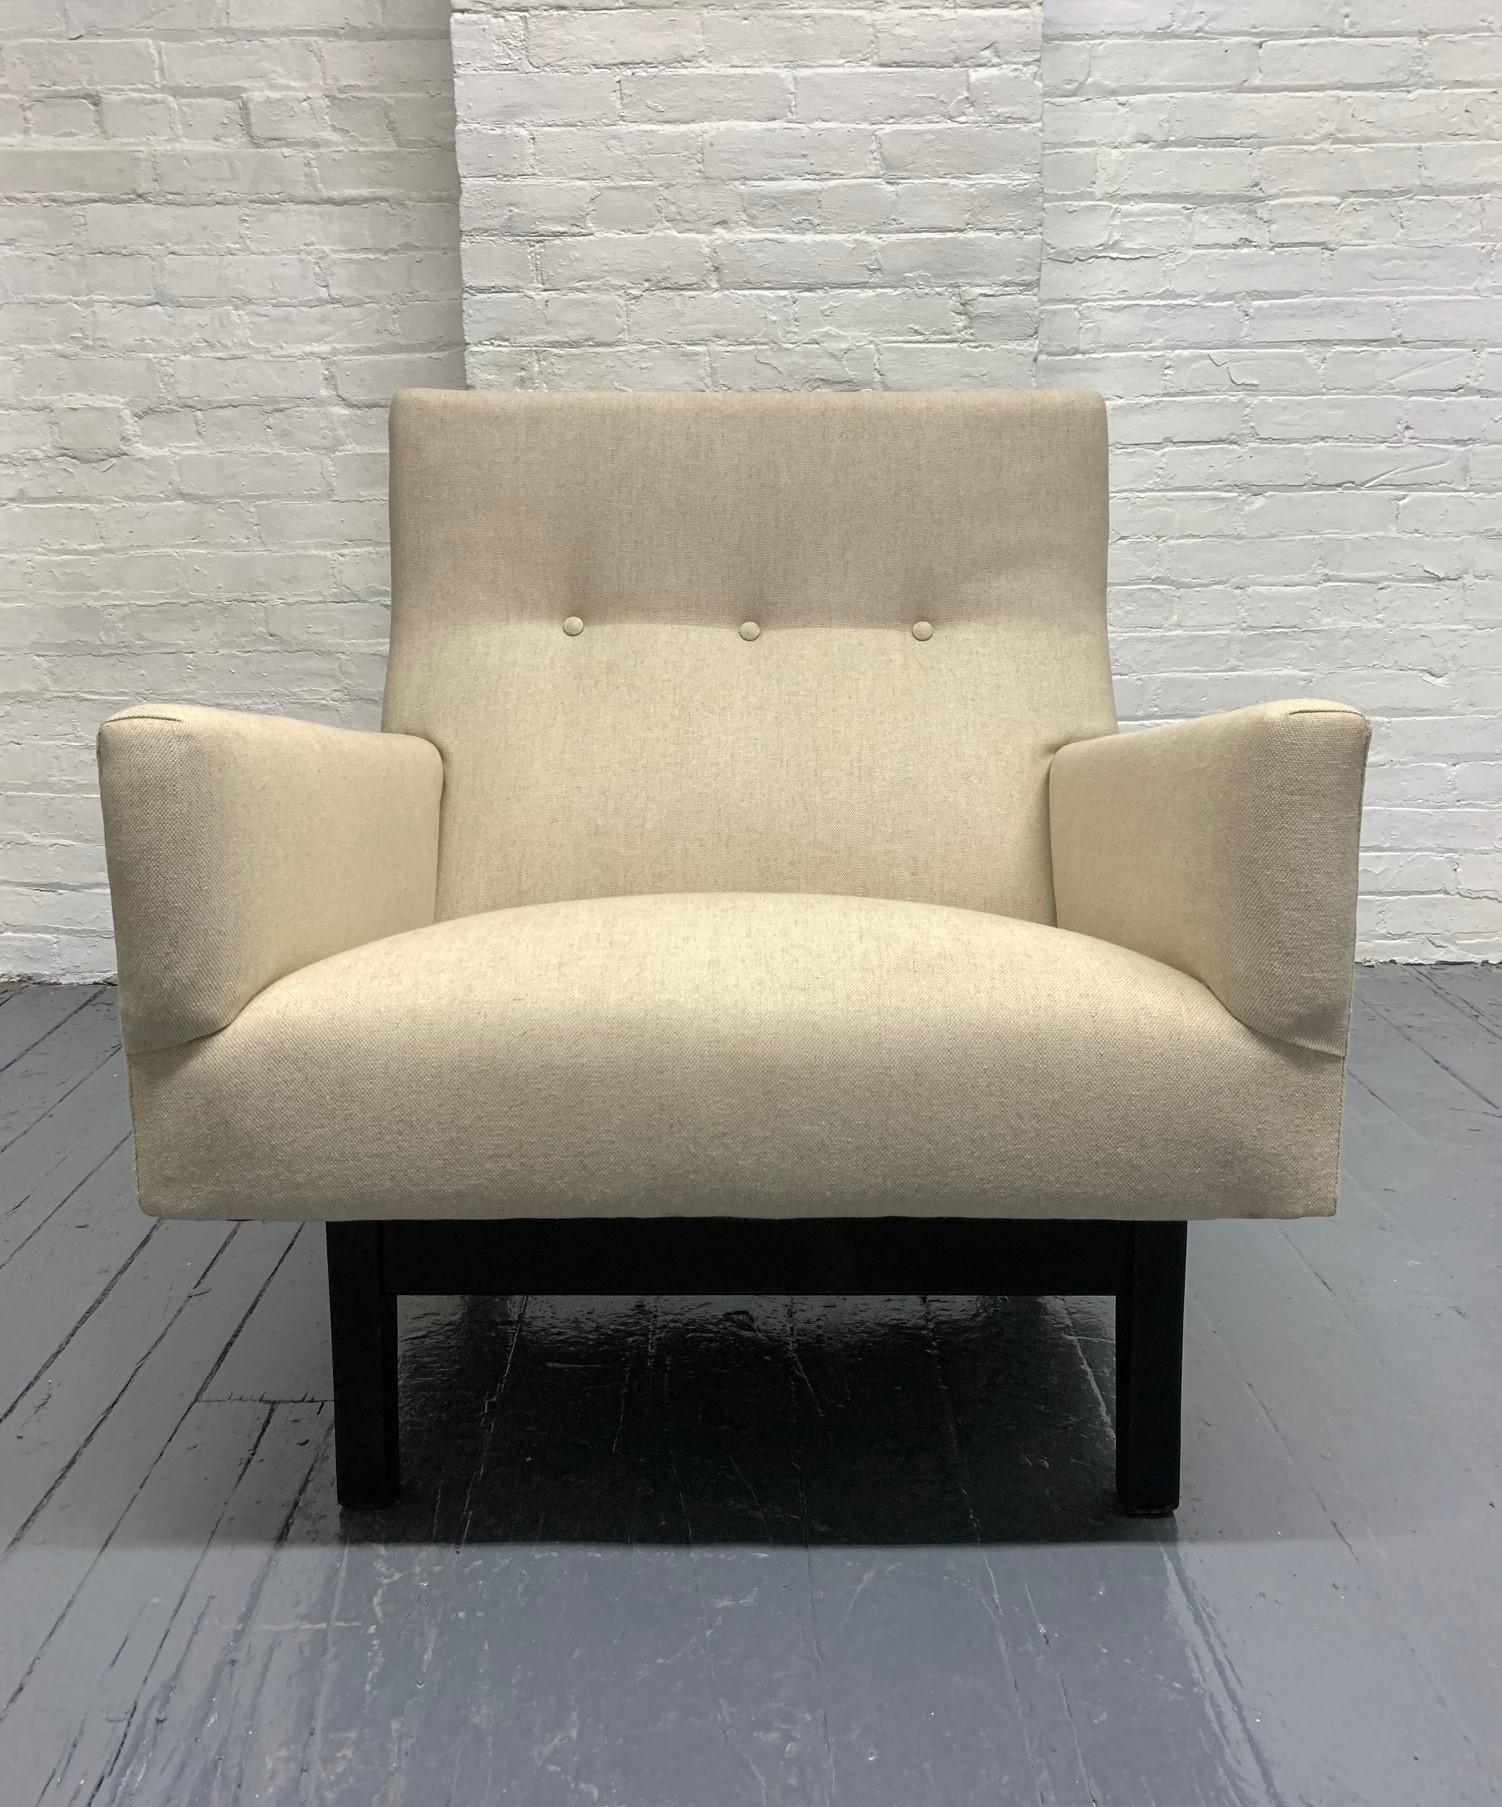 Jens Risom lounge chair. Newly upholstered in a linen-blend fabric with a black lacquered base.